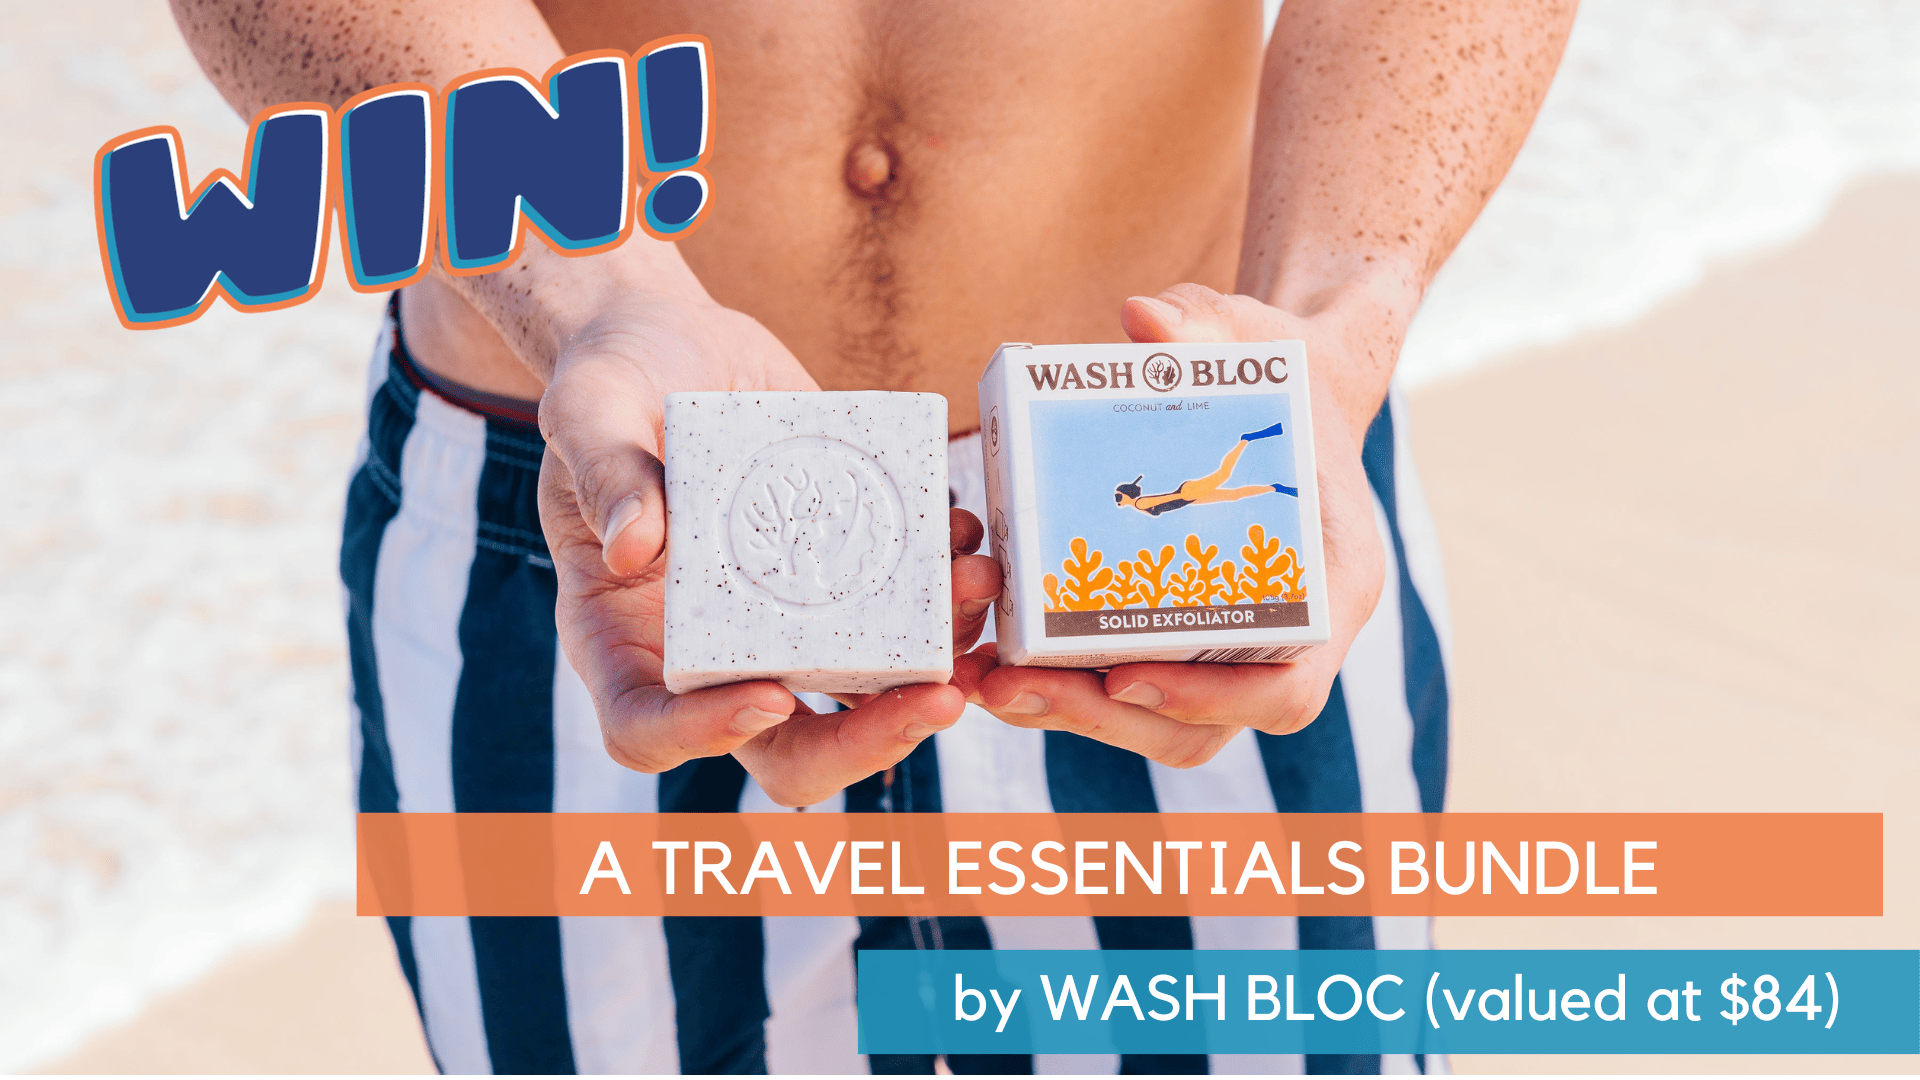 WIN 1 of 3 Travel Essential Bundles from Wash Bloc!